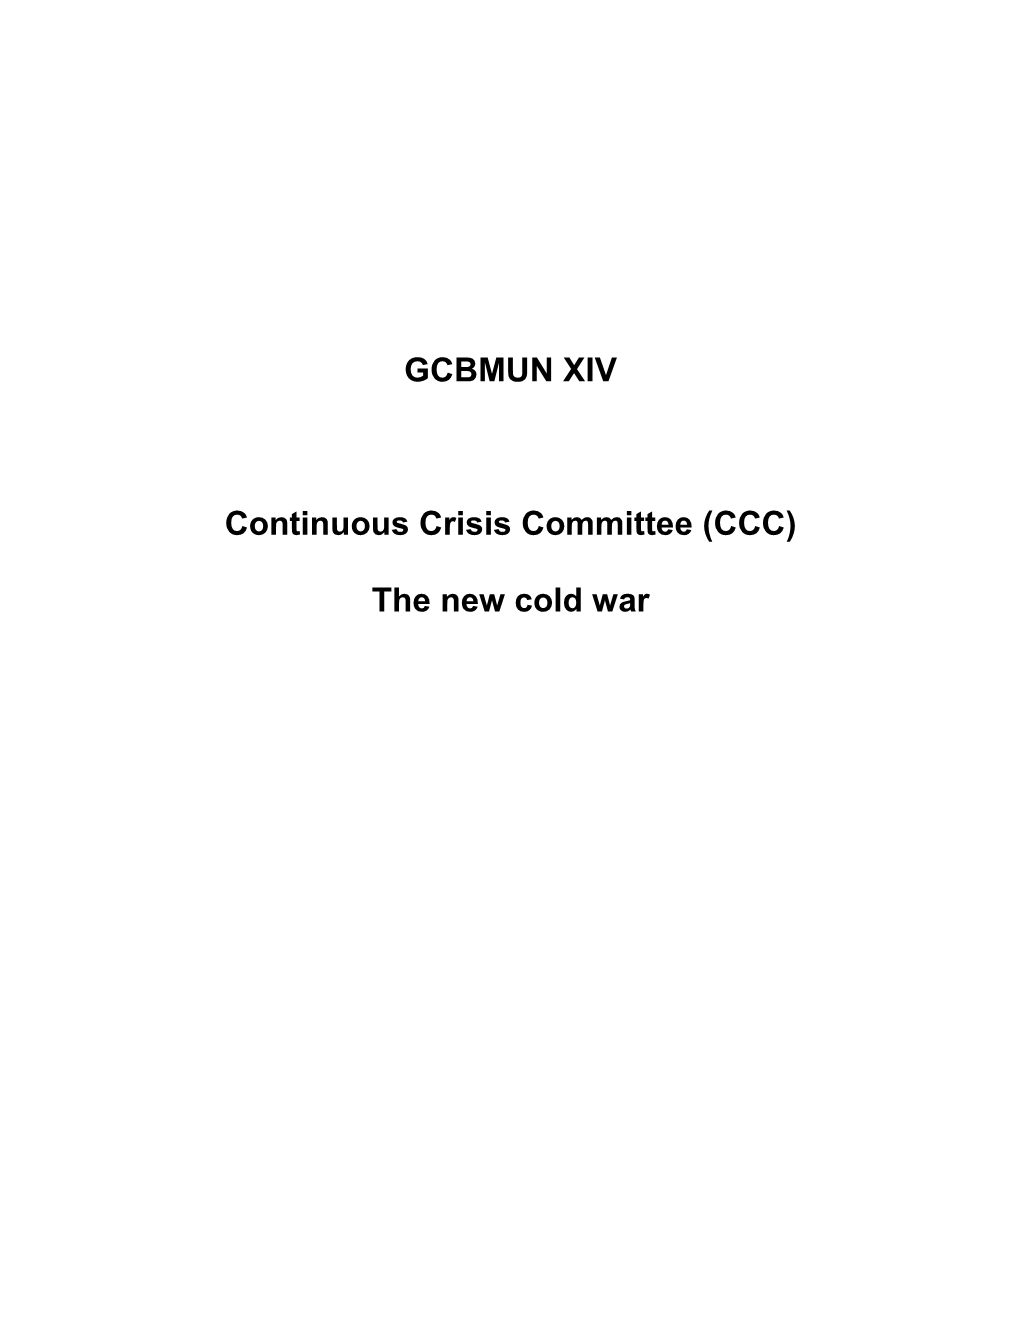 GCBMUN XIV Continuous Crisis Committee (CCC) the New Cold